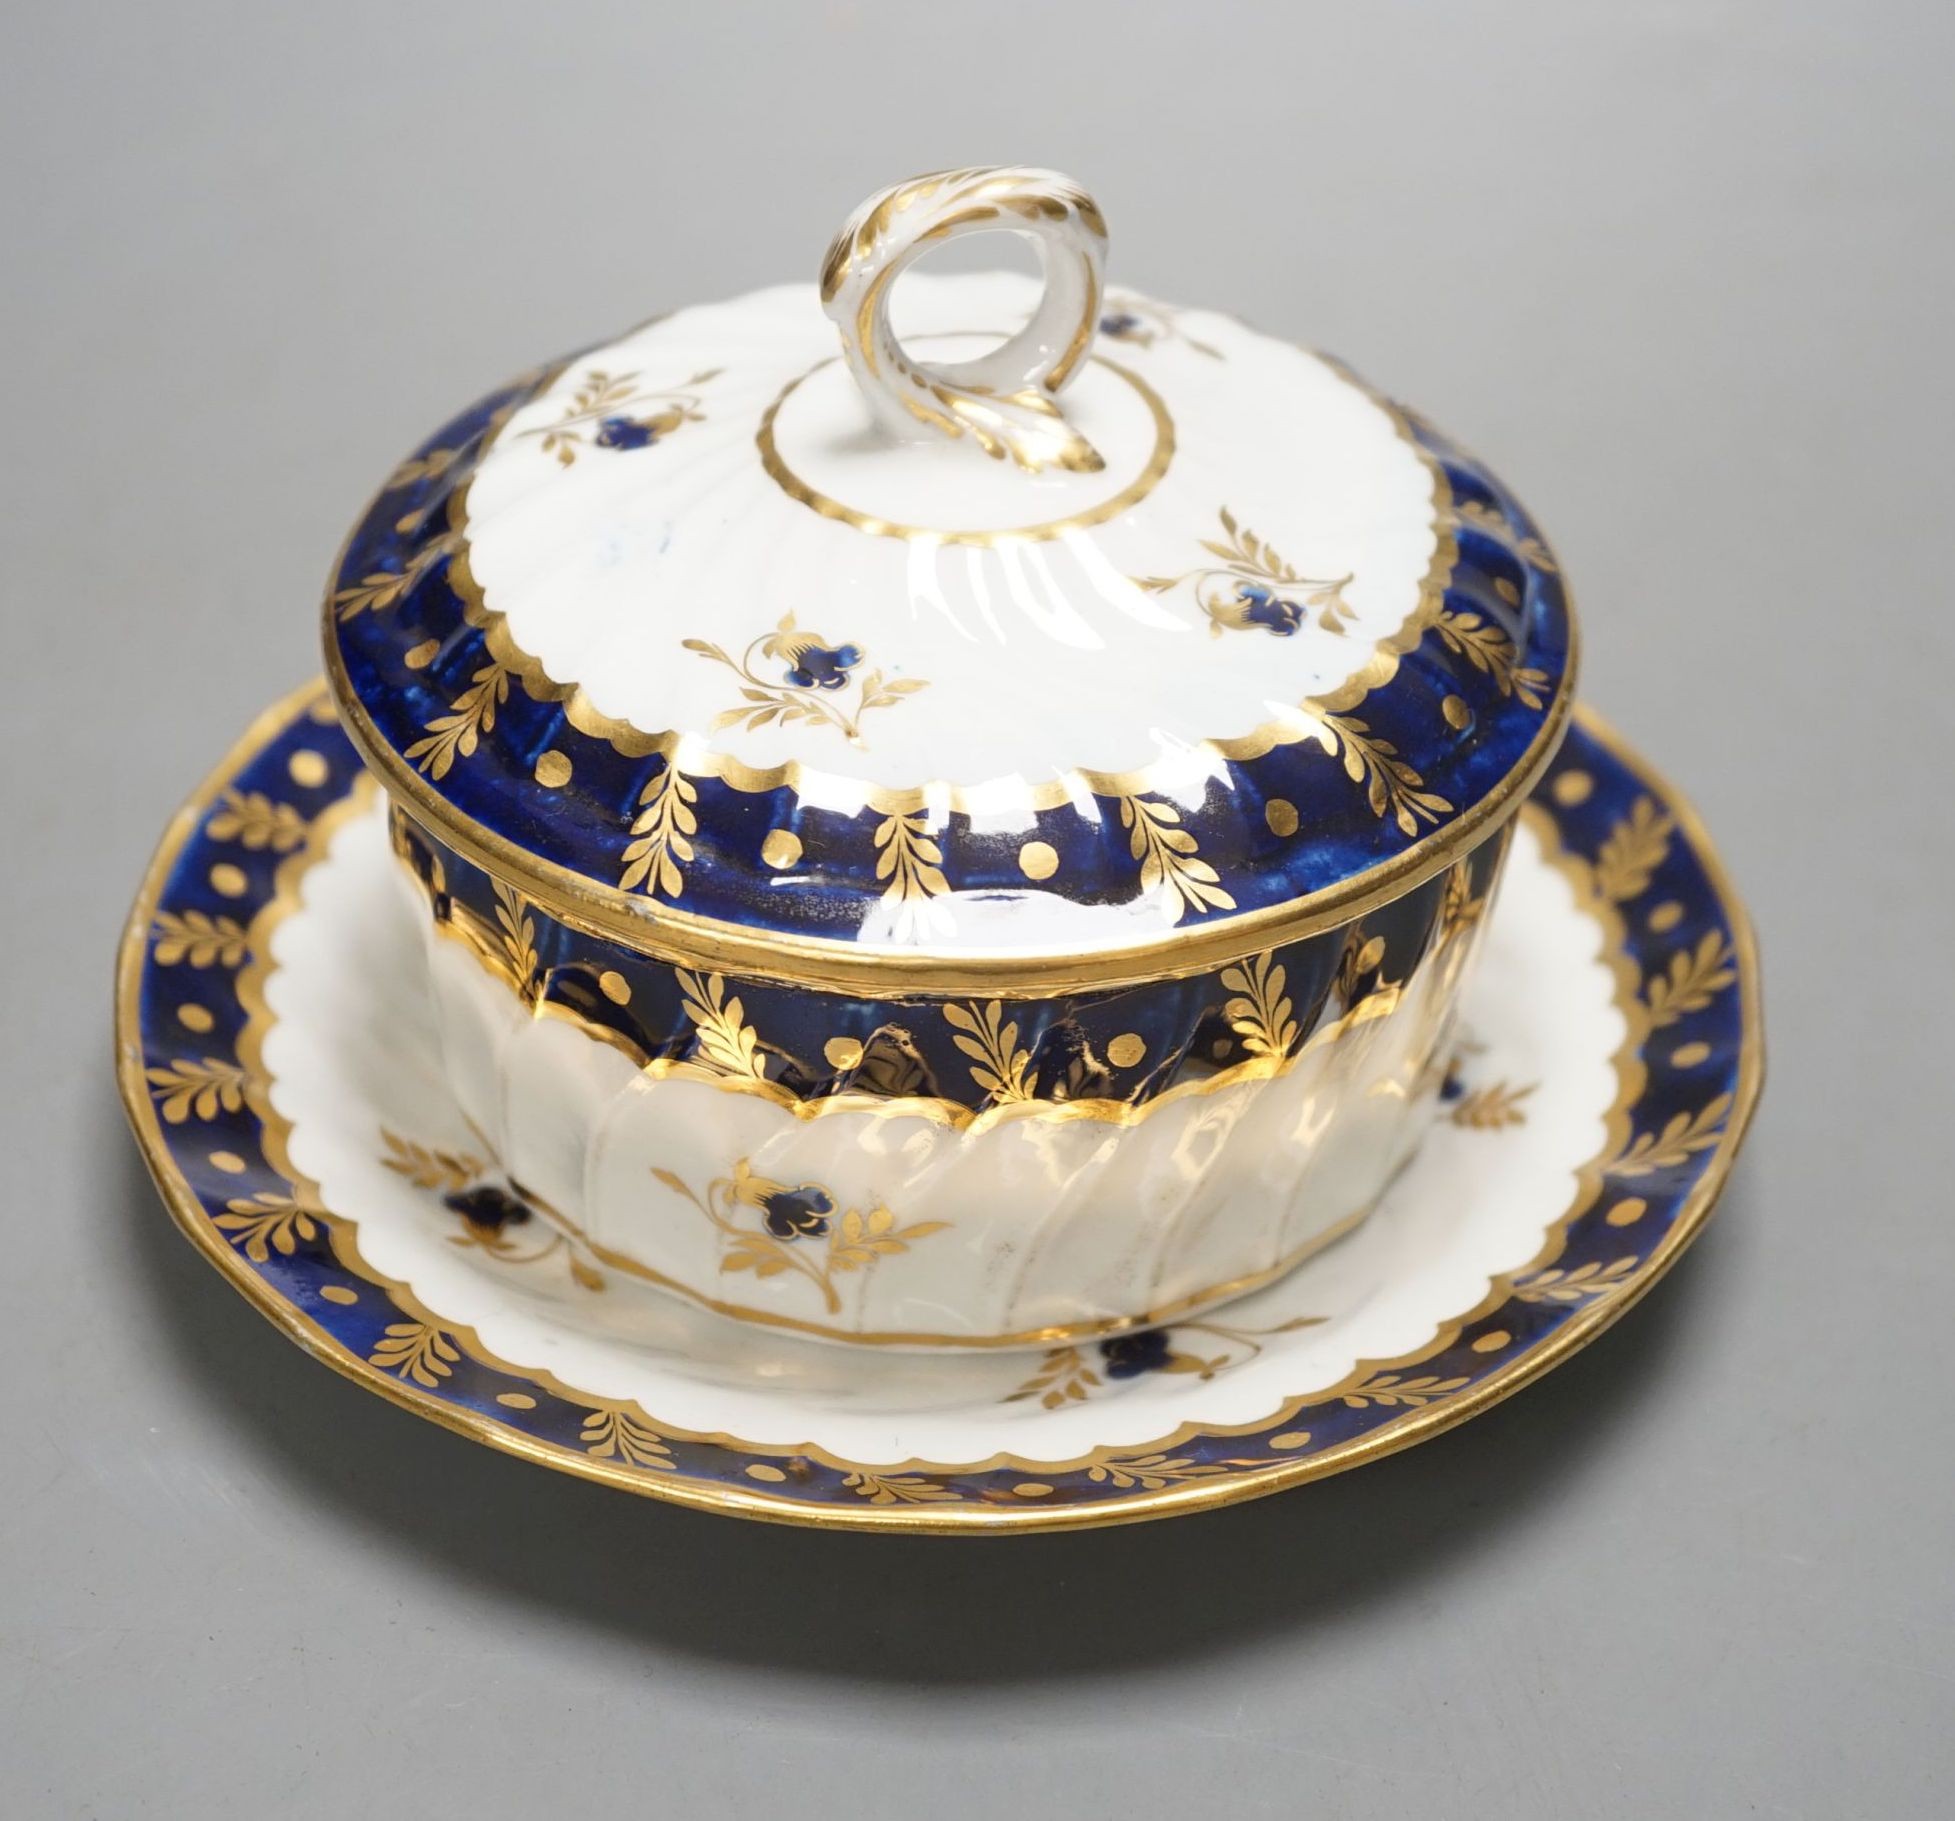 A Chamberlain fine and rare wrythen double tram moulded butter tub, cover and stand decorated in under-glaze blue and gilt c.1800, 12 cms high.